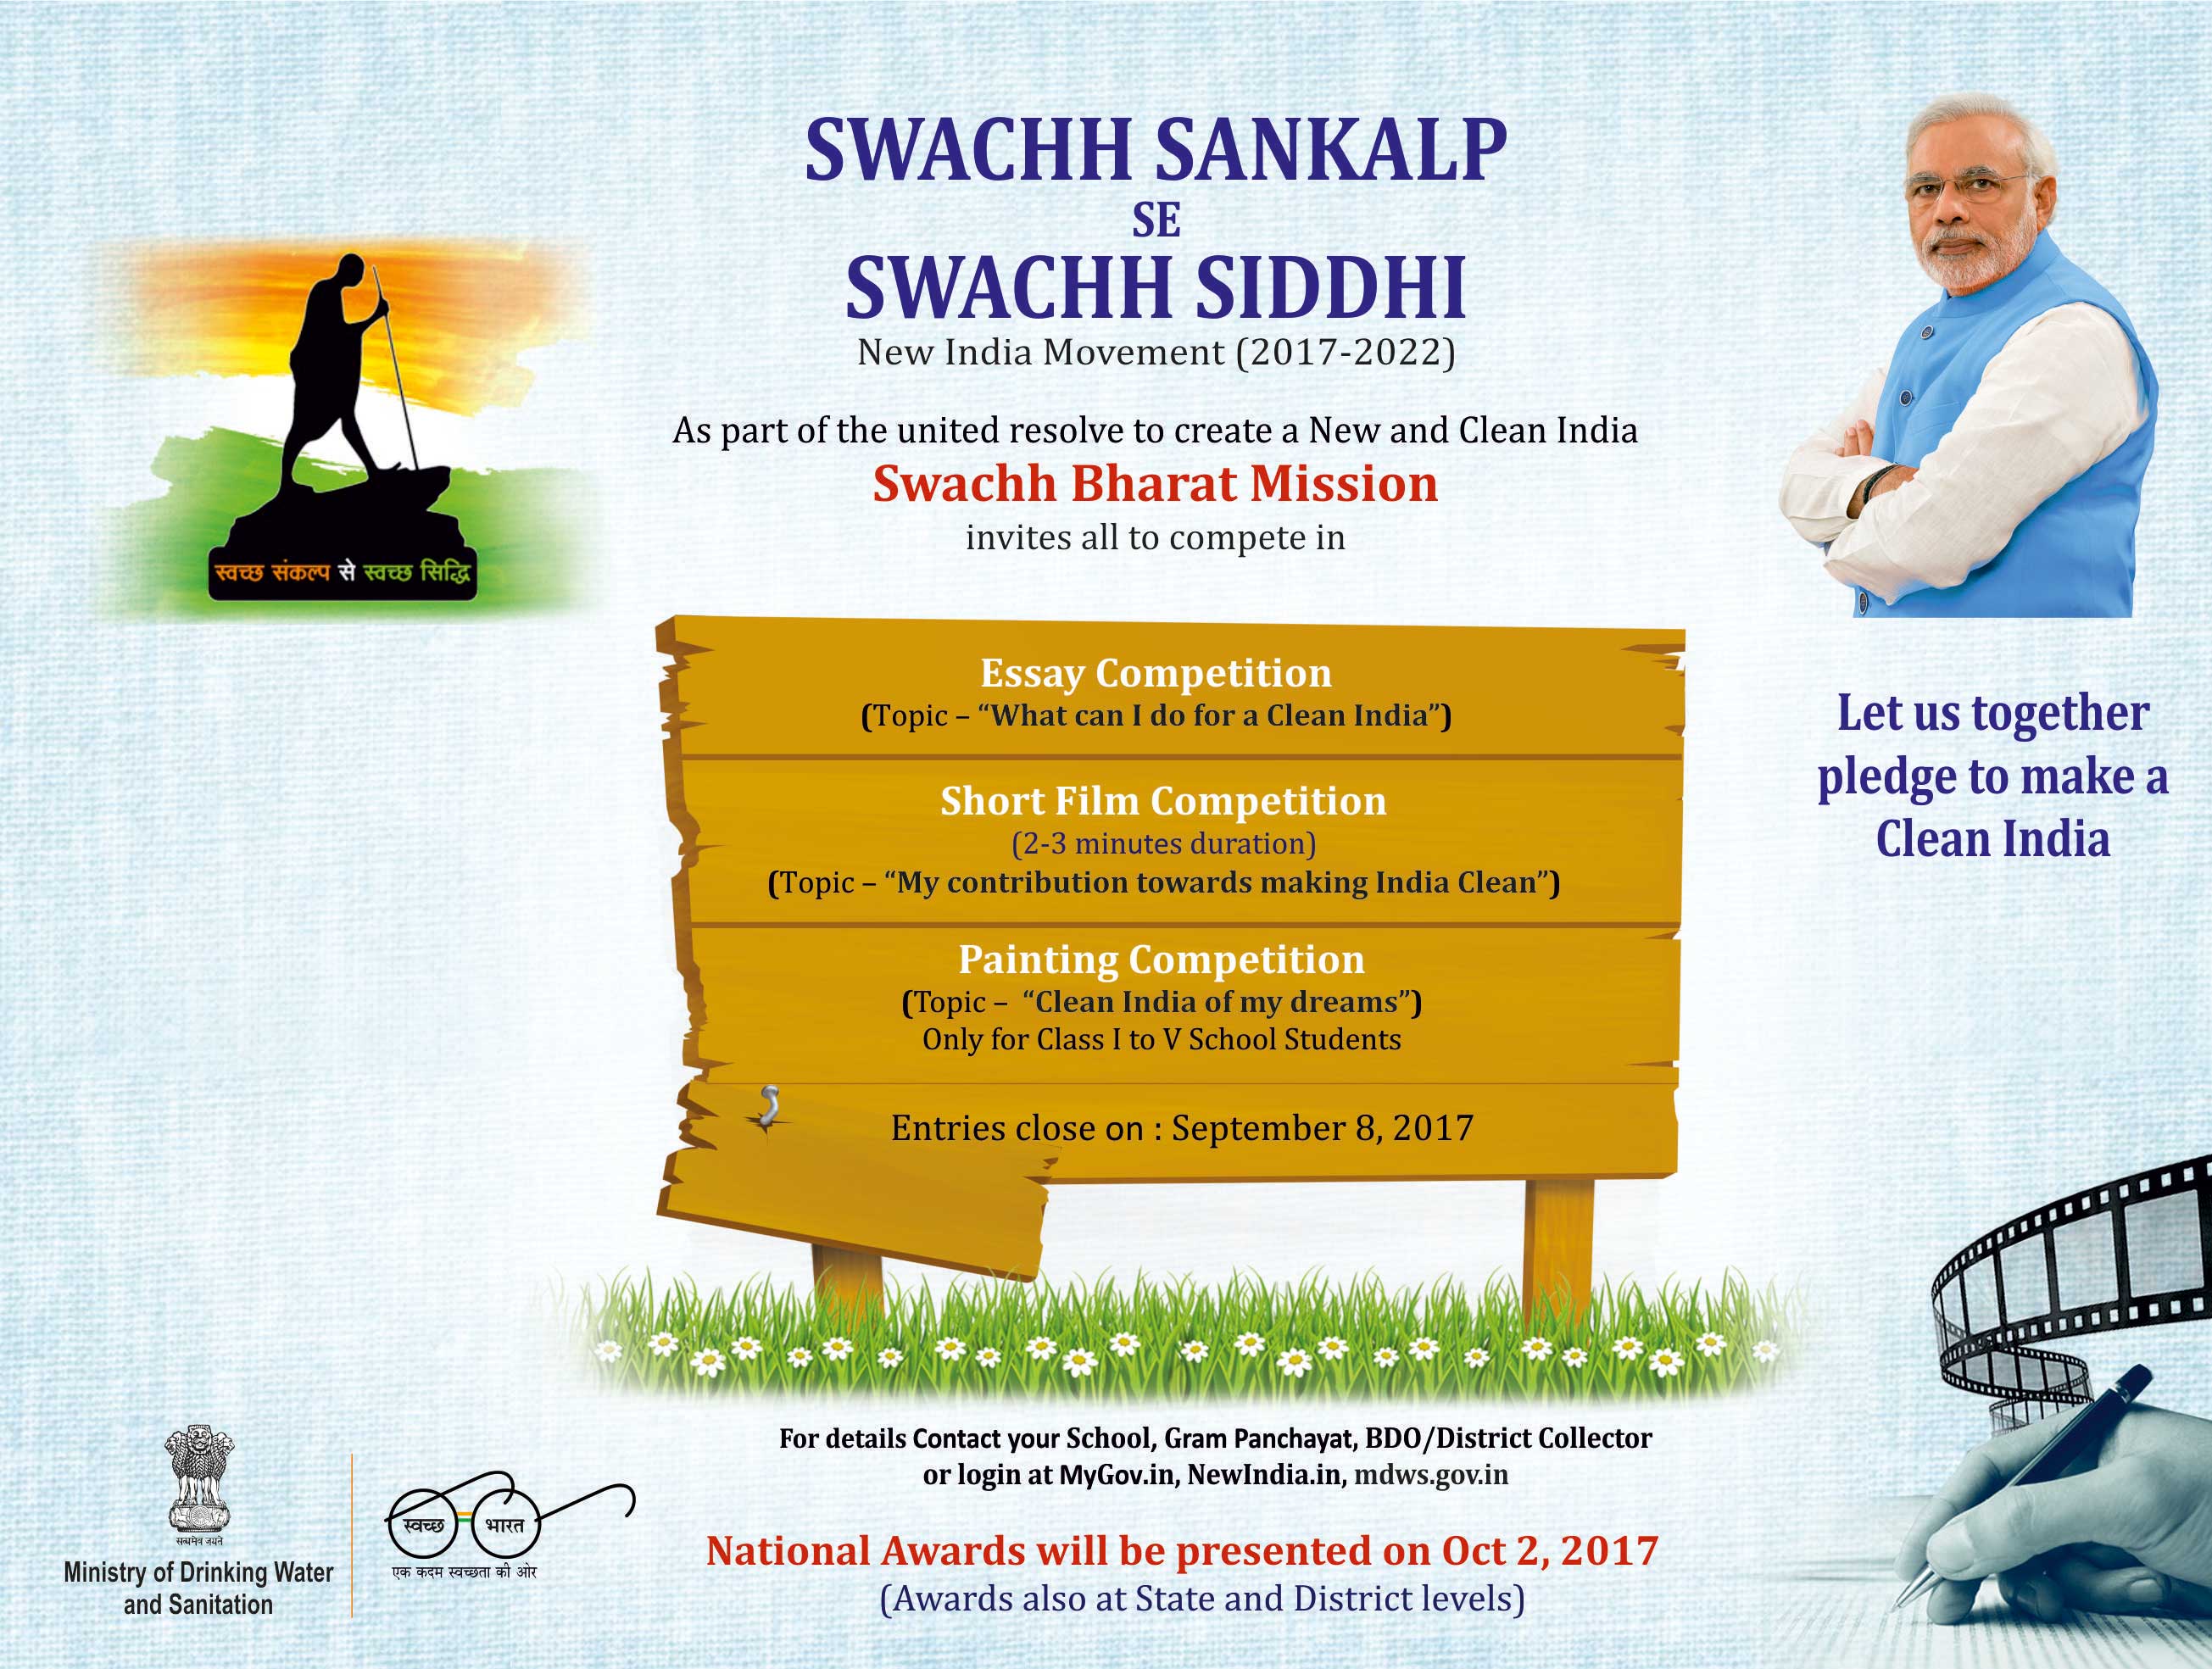 MDWS organizes ODF Collectors’ Conference on Swachh Bharat in LBSNAA